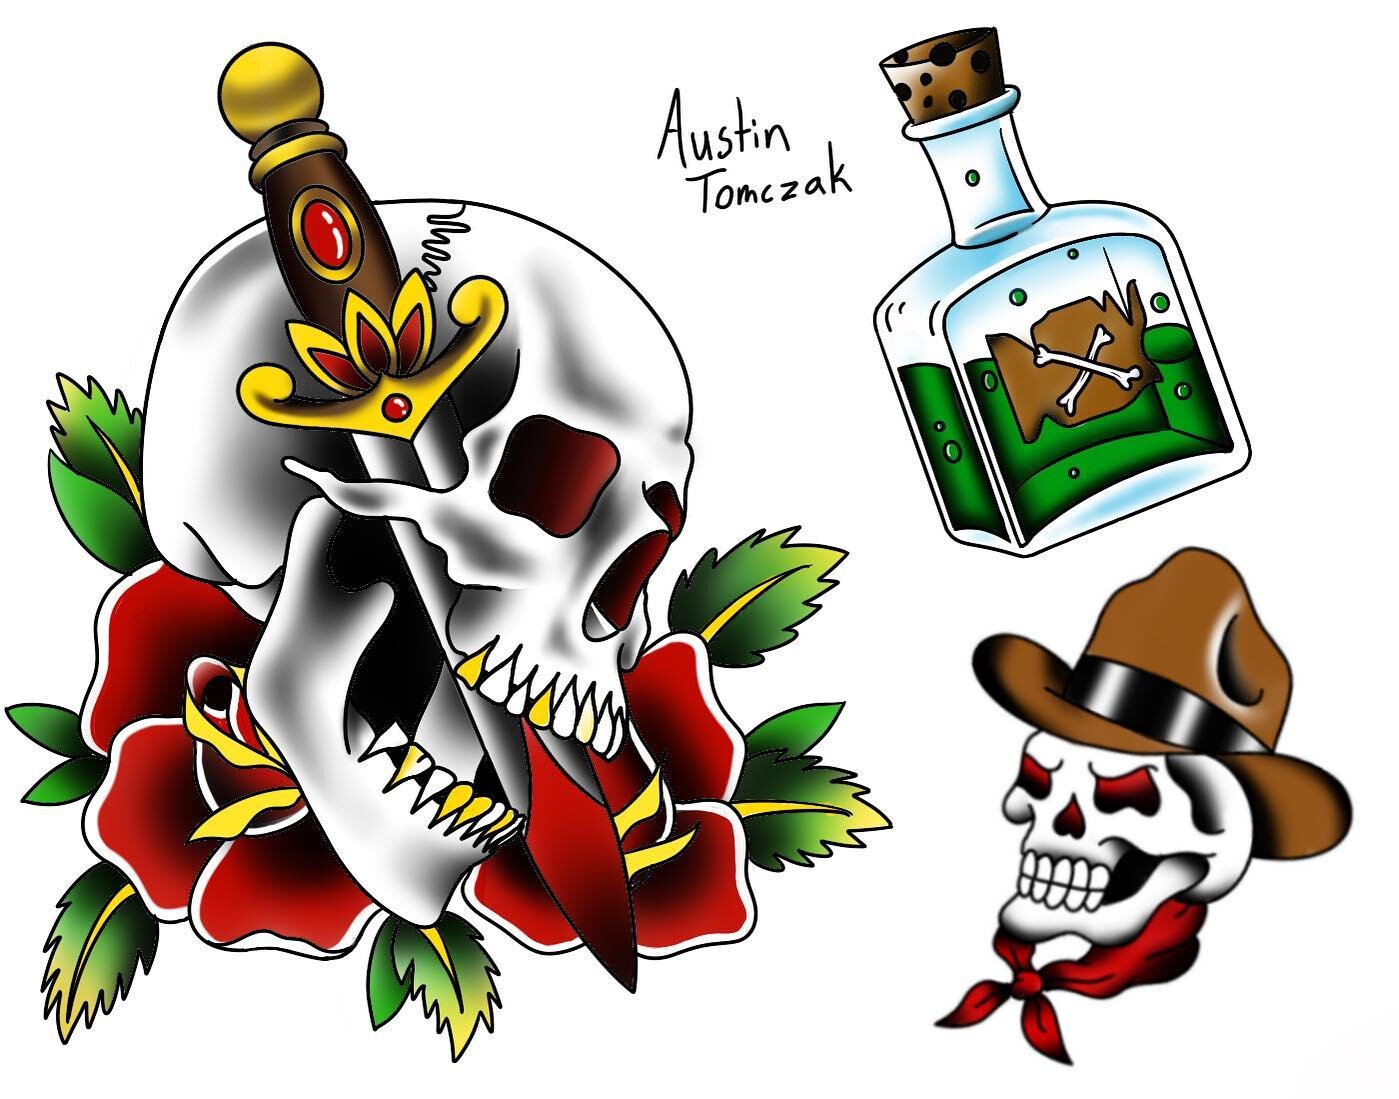 More designs I drew up! Available to be tattooed!
#tattooflash